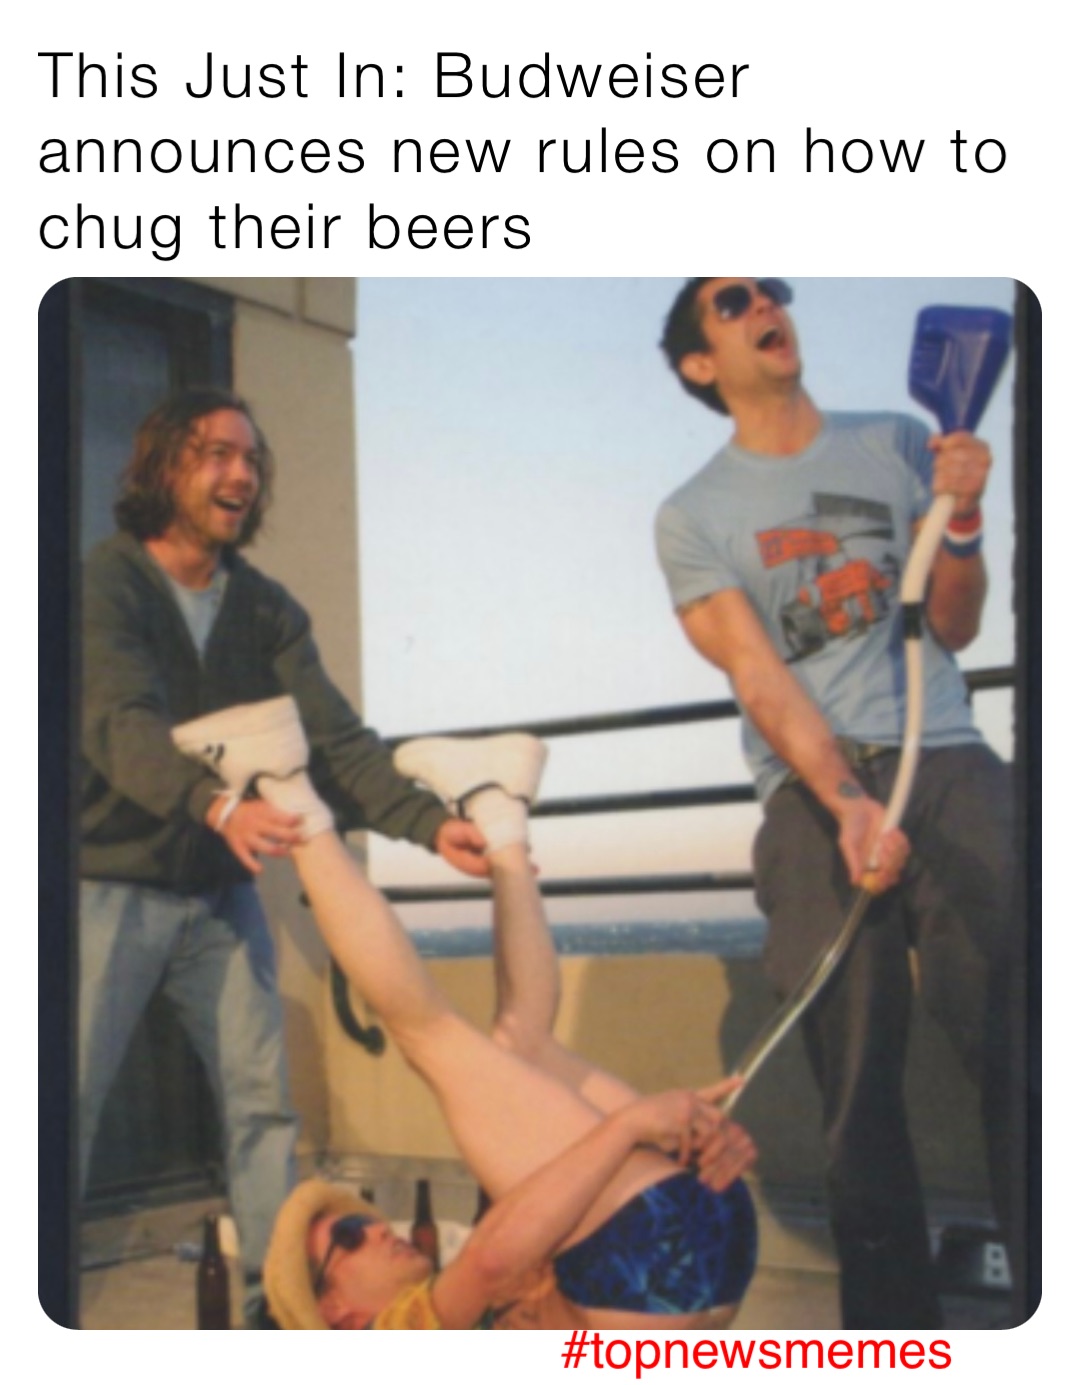 This Just In: Budweiser announces new rules on how to chug their beers